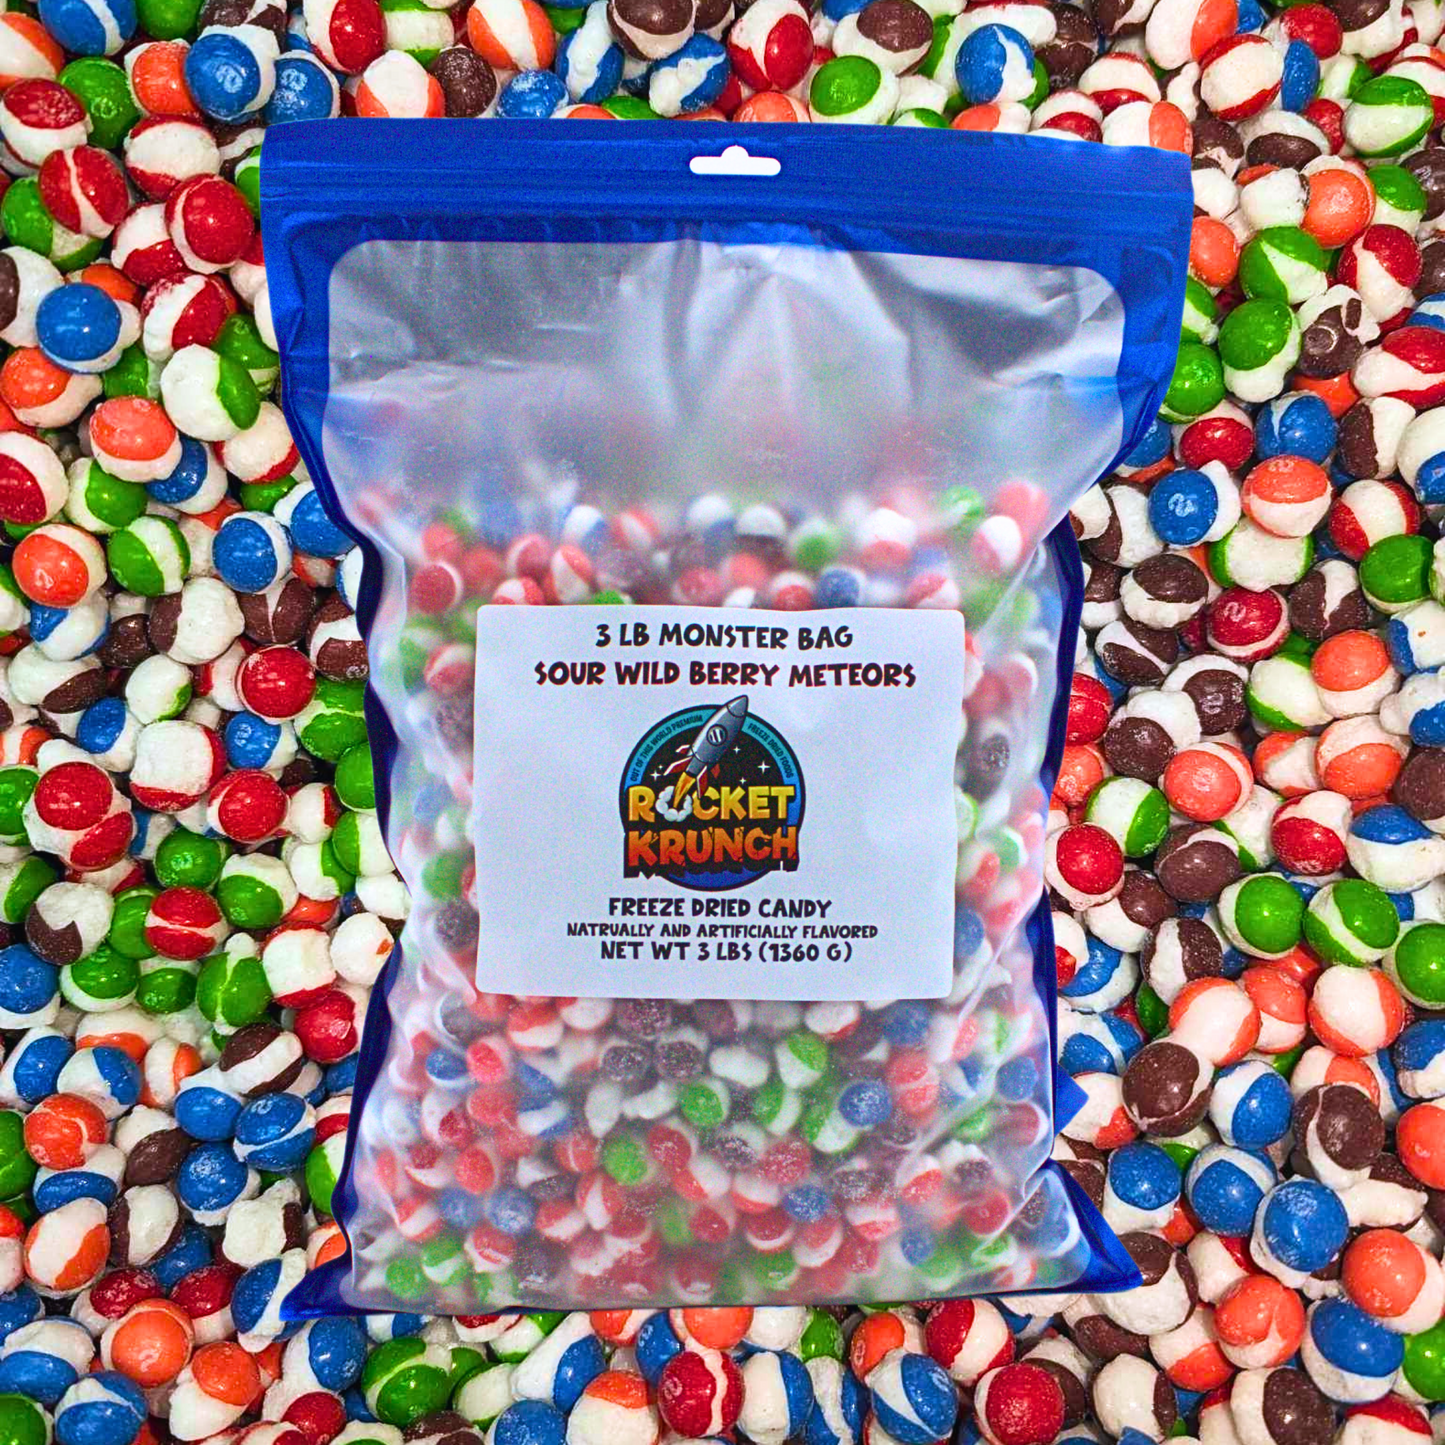 Sour Wild Berry Meteors Freeze-Dried Candy